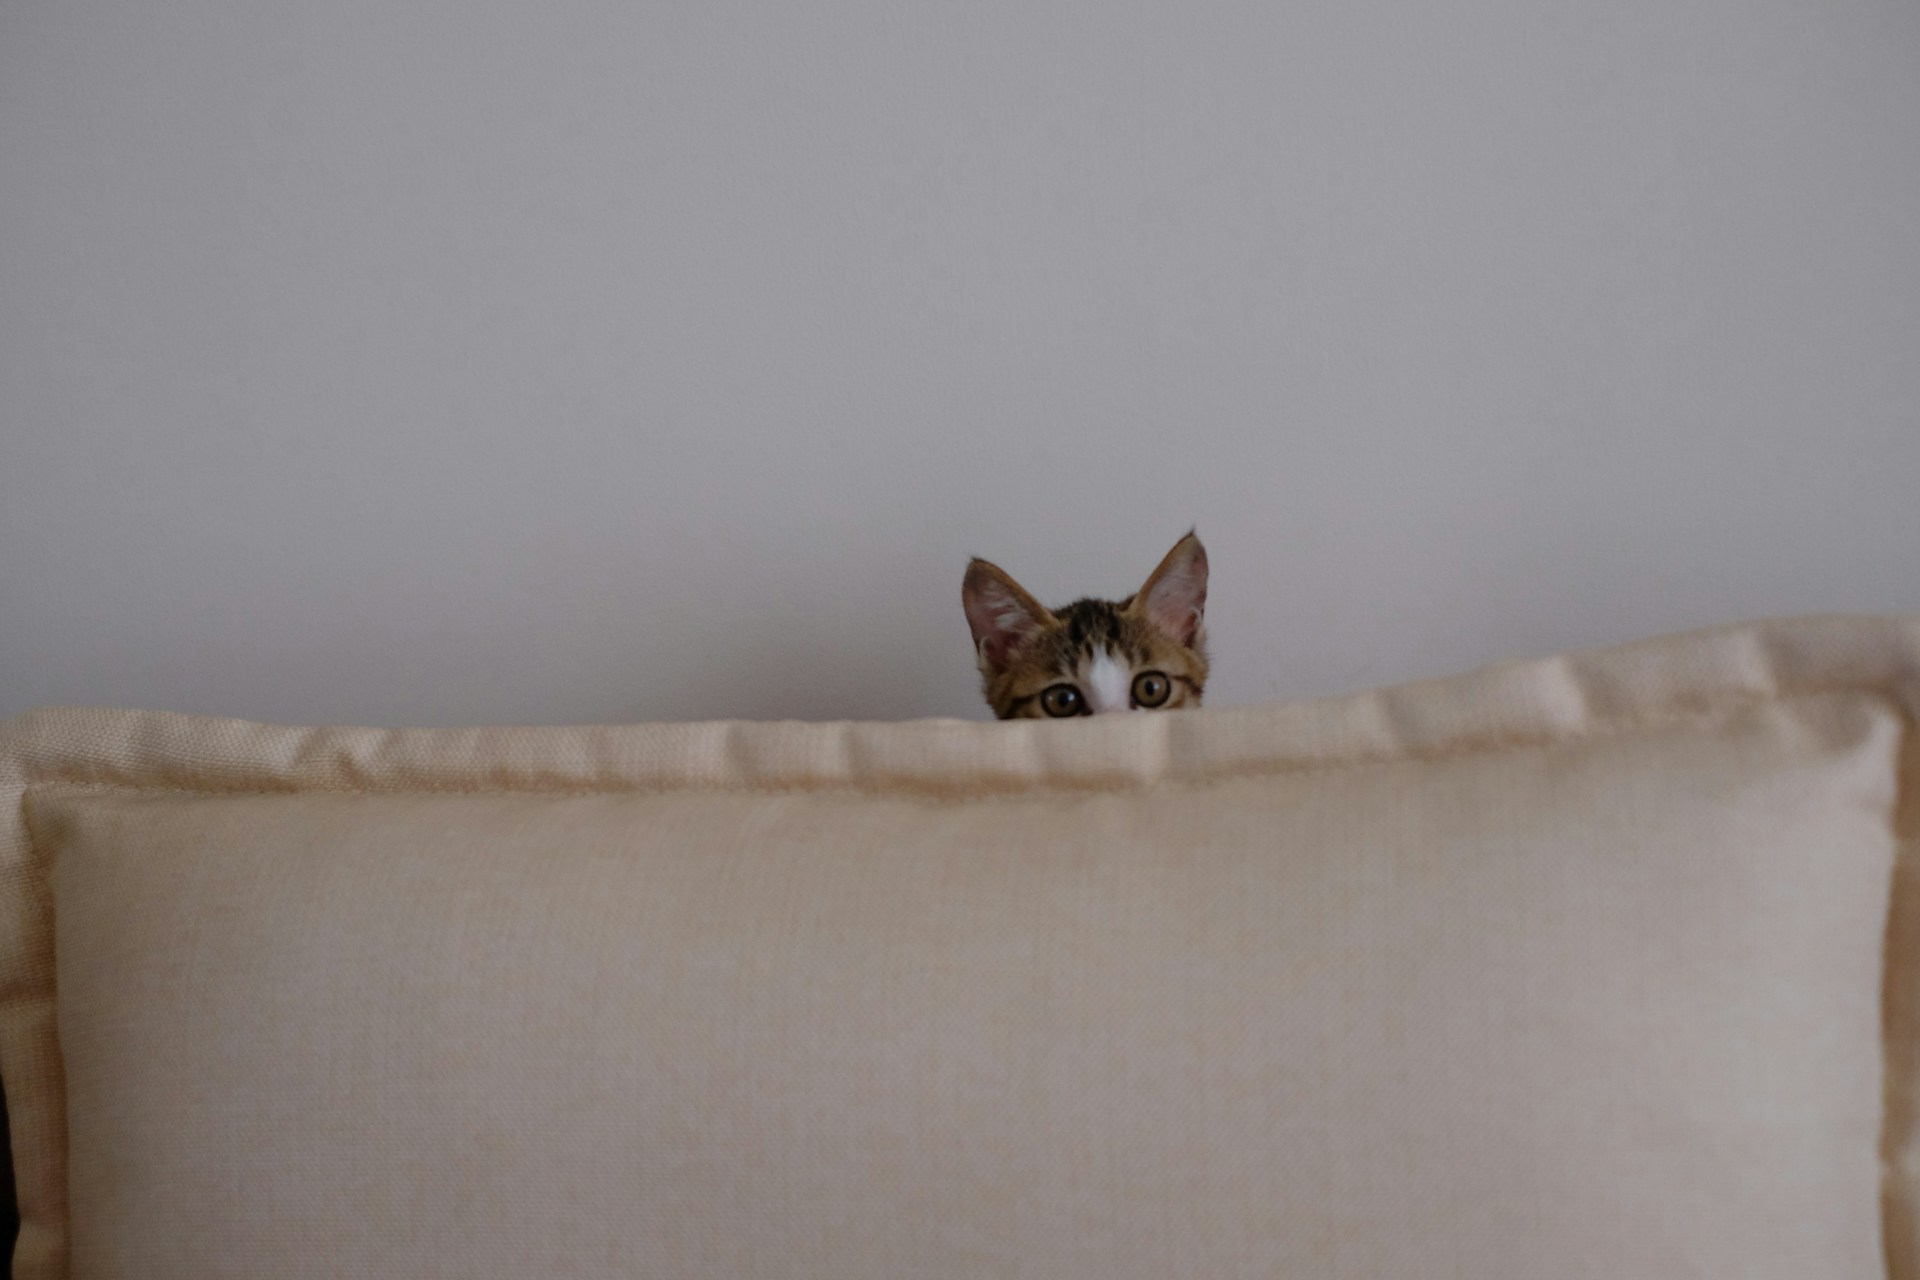 A small cat hiding behind a couch pillow